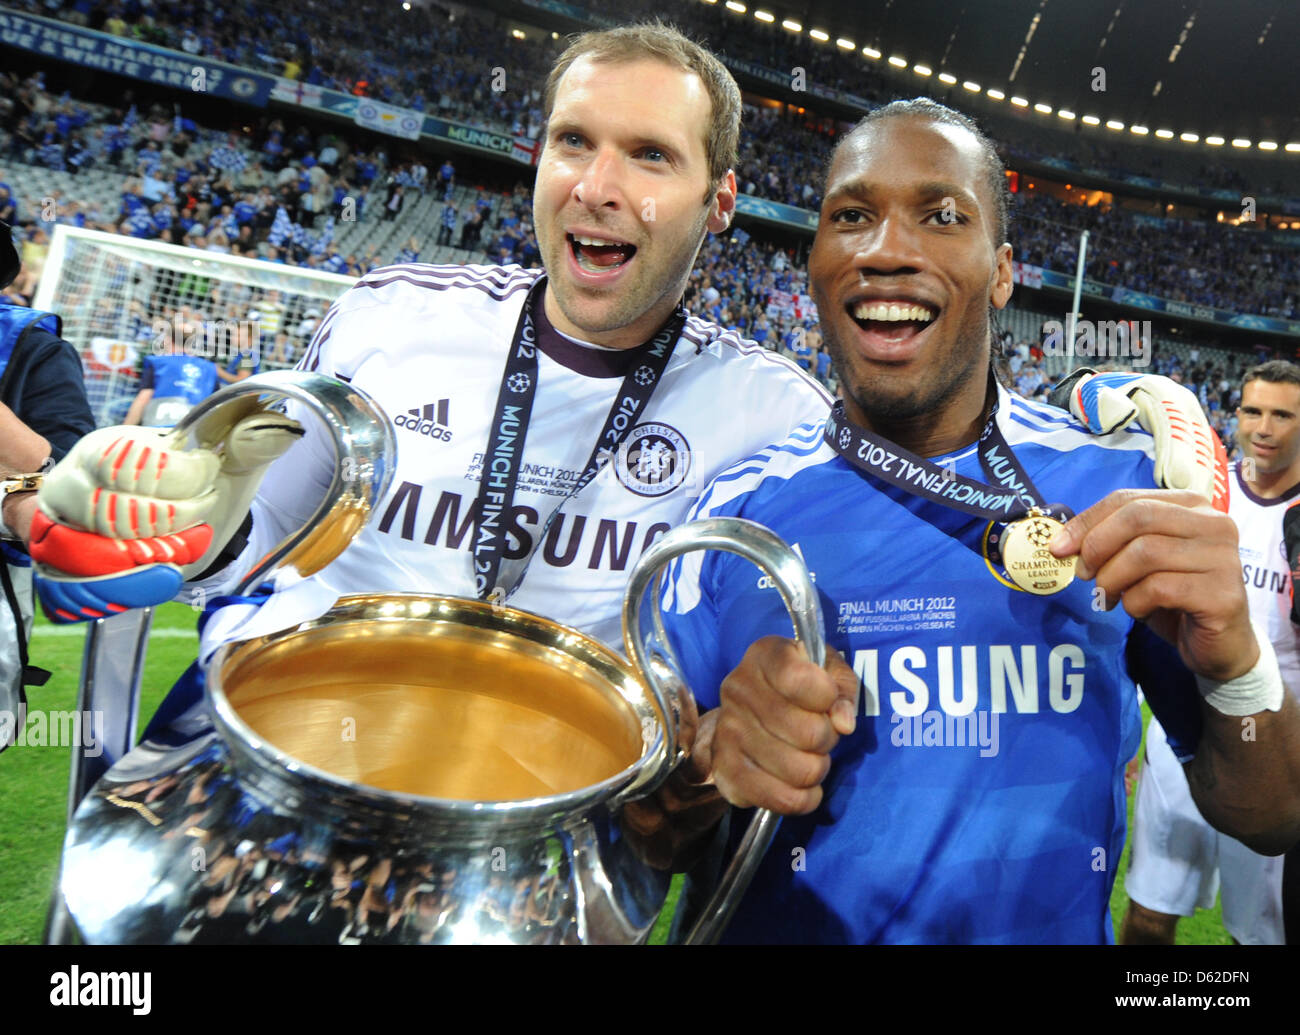 Chelsea's Petr Cech (L) and Didier Drogba celebrate with the trophy after the UEFA Champions League soccer final between FC Bayern Munich and FC Chelsea at Fußball Arena München in Munich, Germany, 19 May 2012. Photo: Tobias Hase dpa/lby  +++(c) dpa - Bildfunk+++ Stock Photo